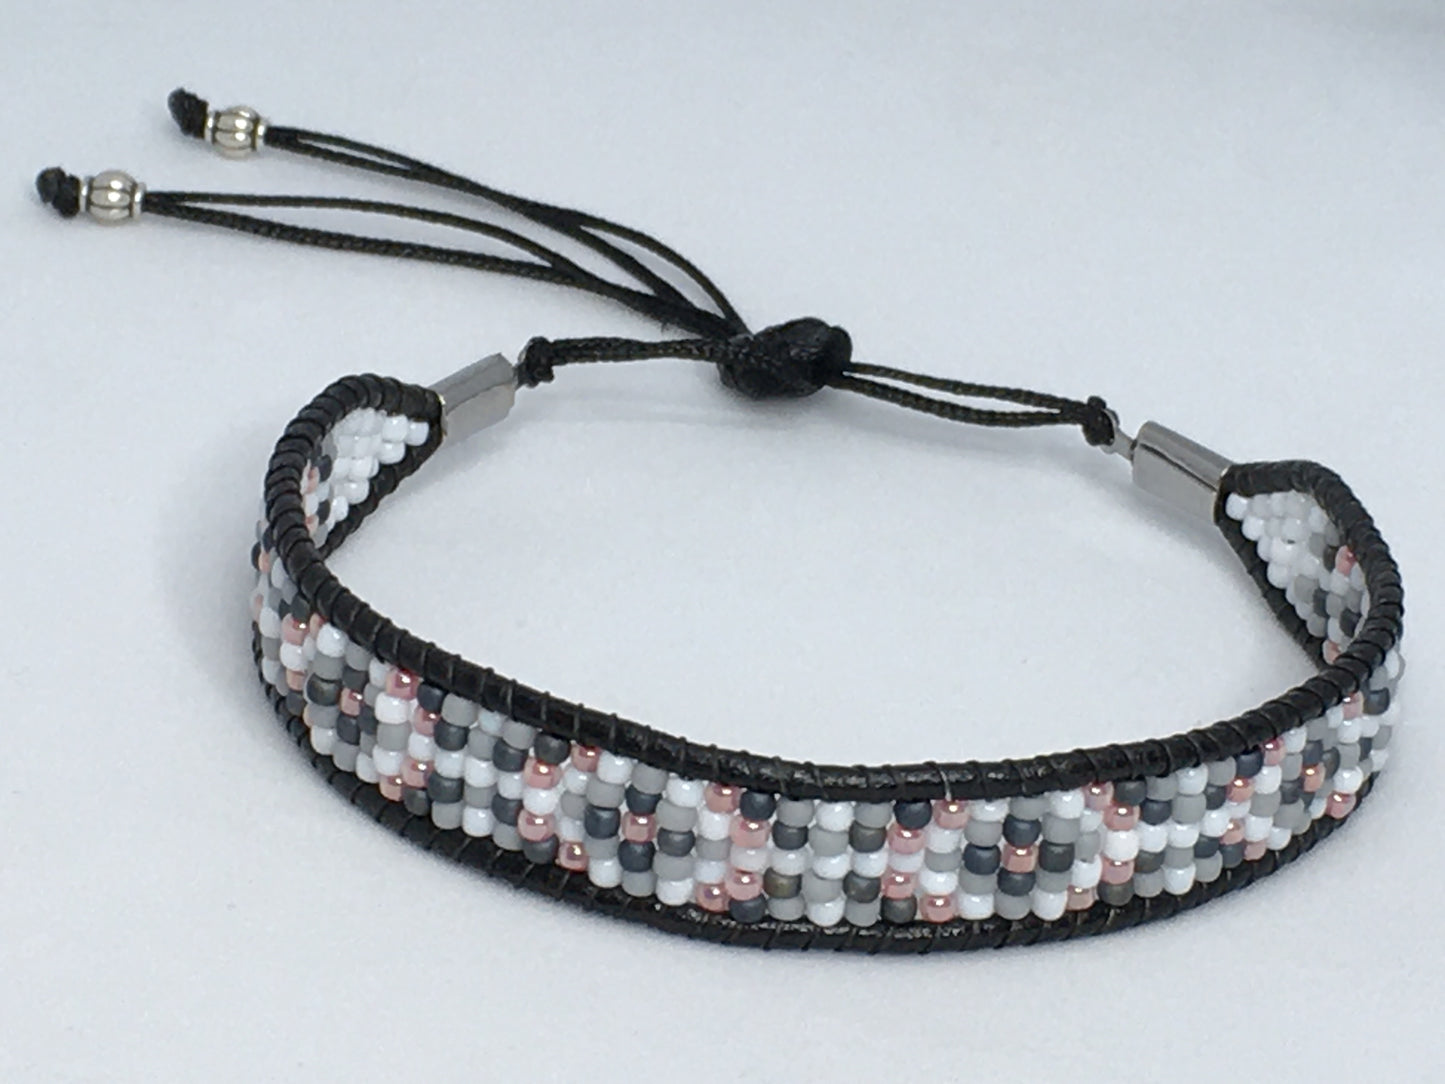 7" Bead and Leather Women's Bracelet